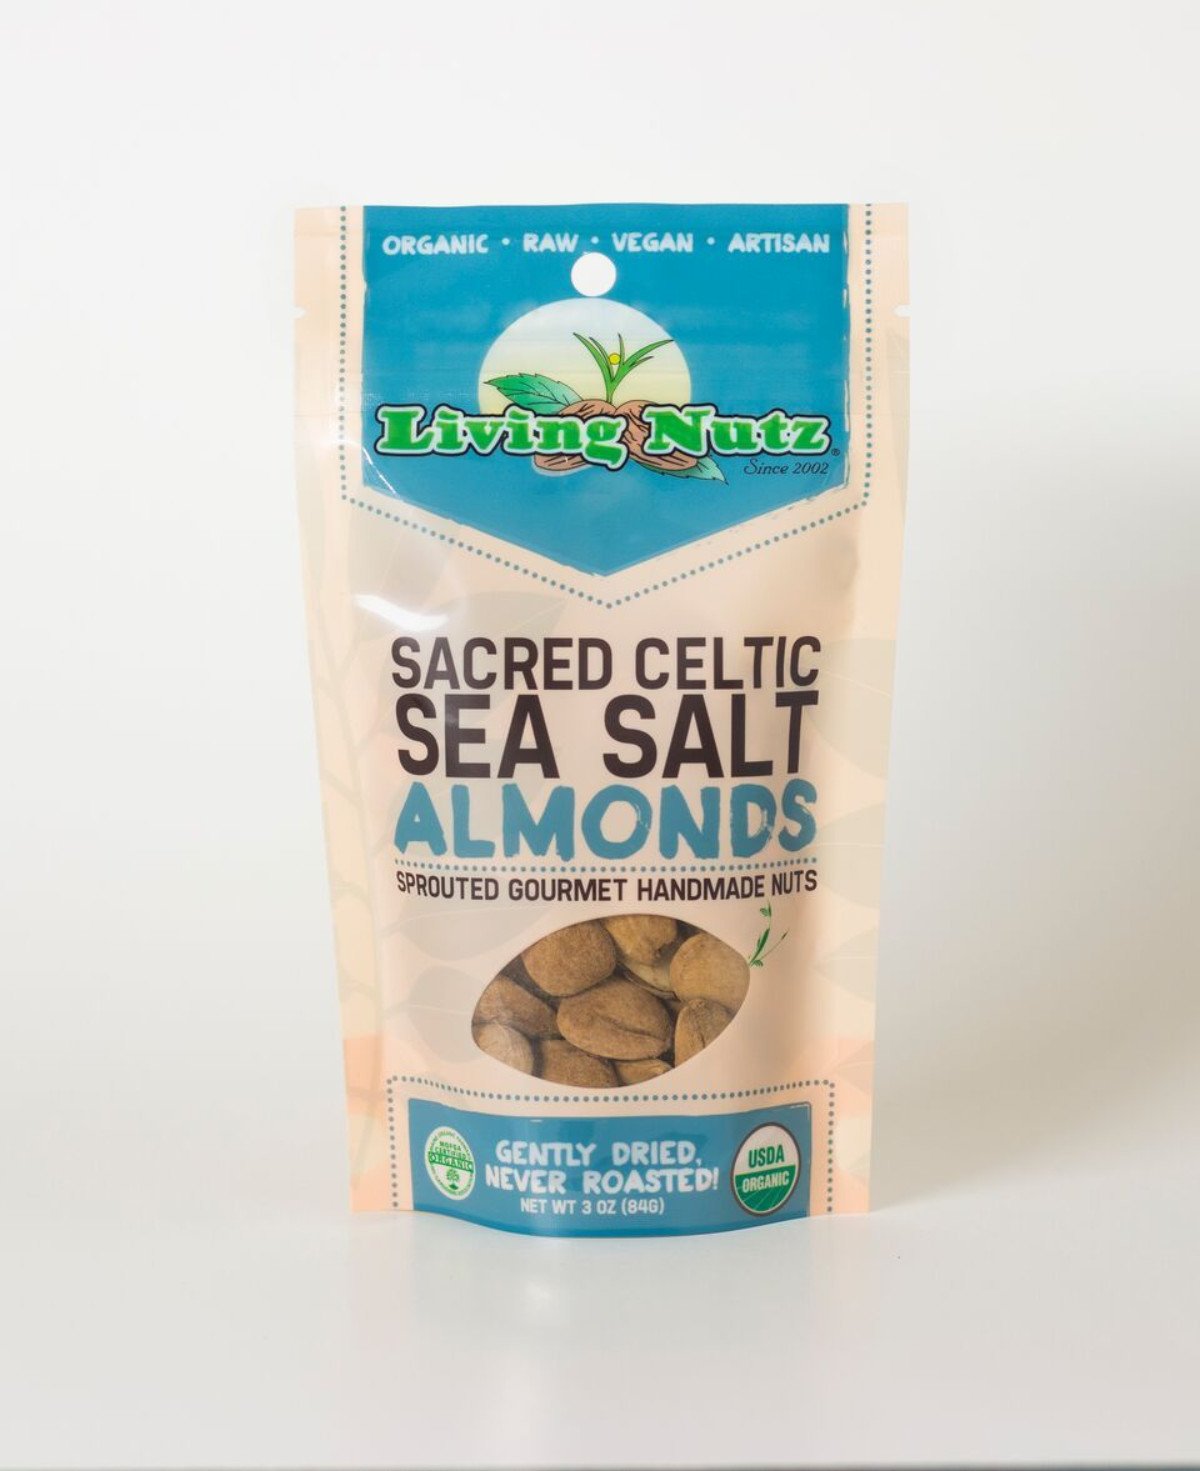 Organic raw sprouted nuts. Sprouted raw &amp; unpasteurized almonds with sea salt. Living Nutz organic snacks.